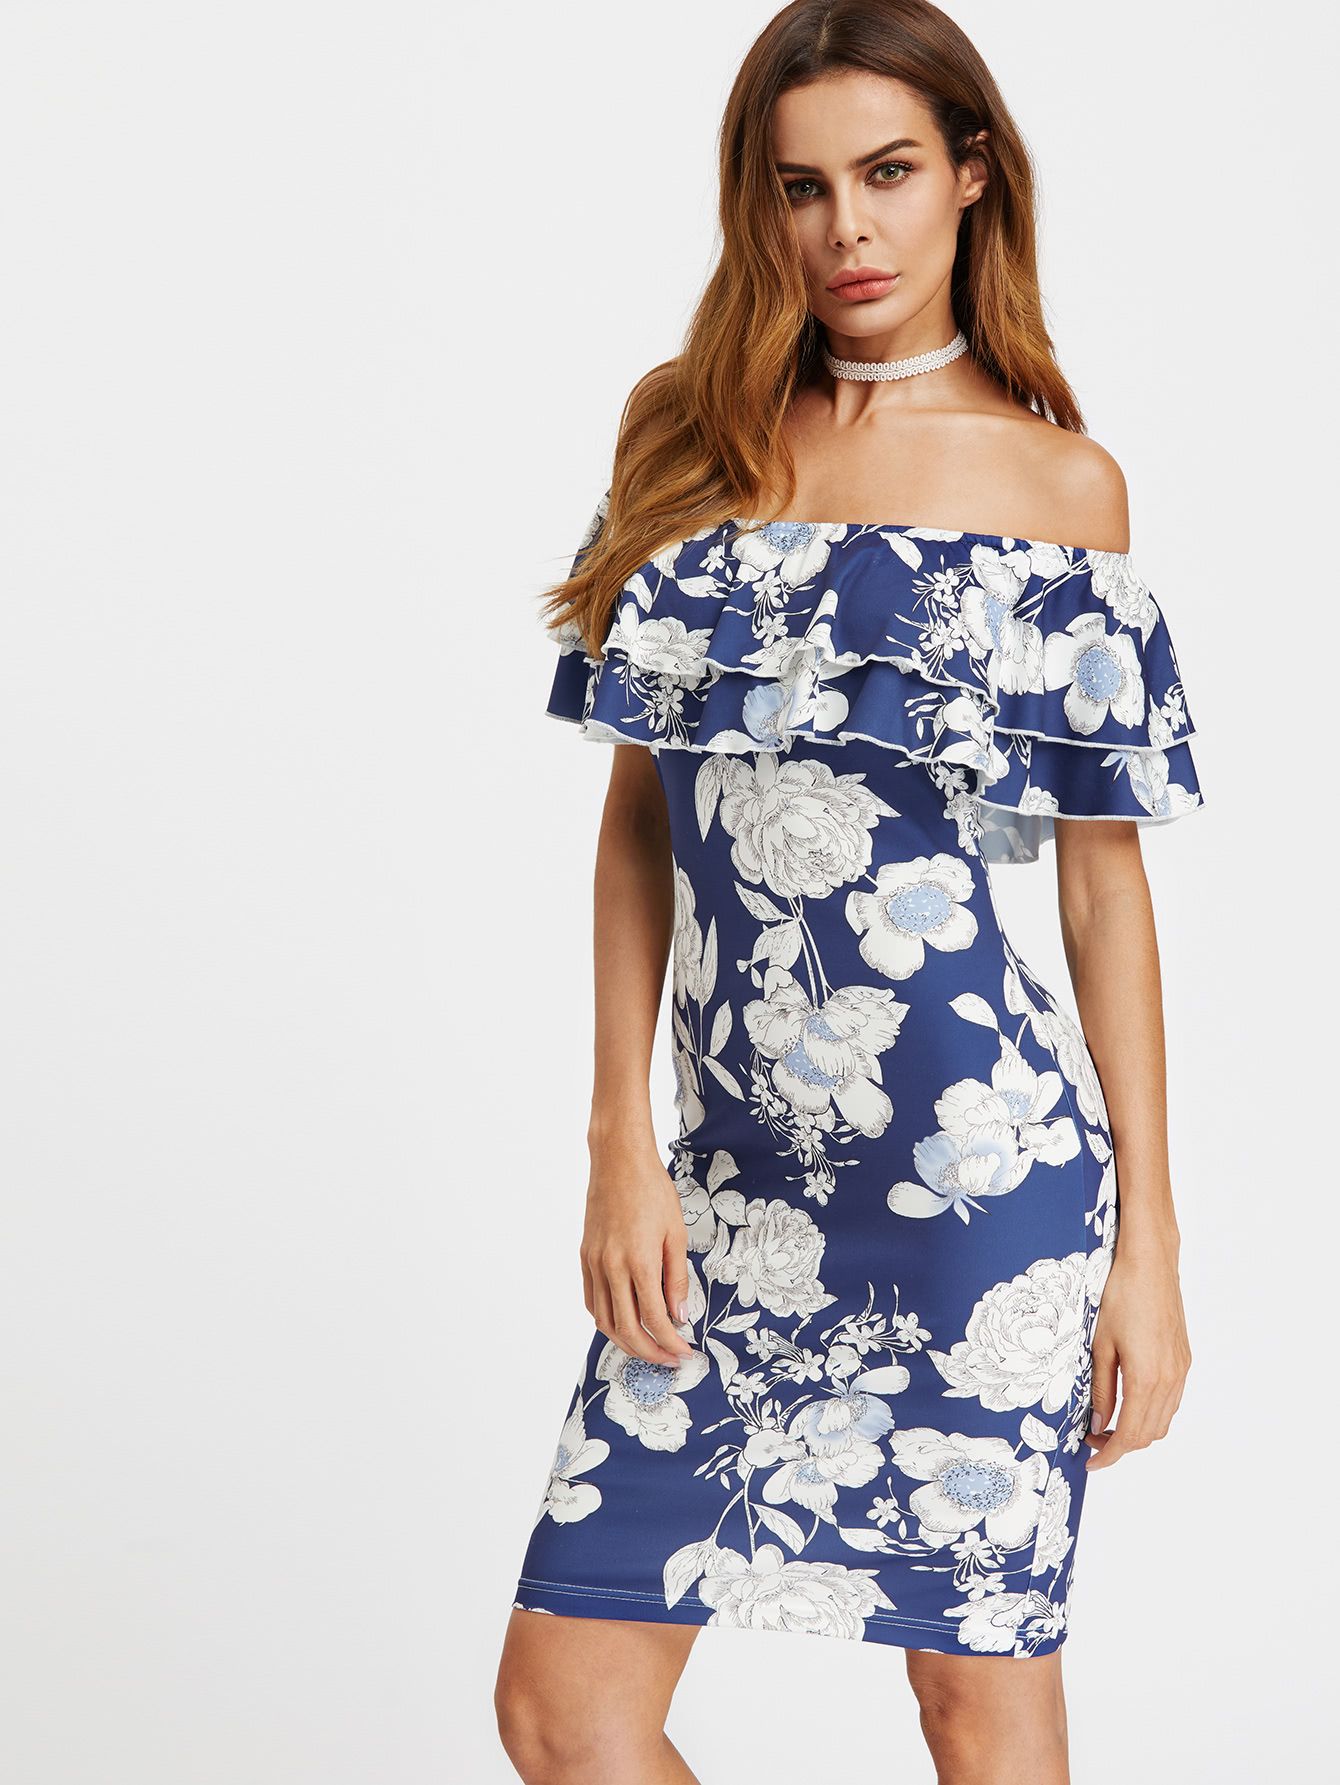 Floral Print Flounce Layered Neckline Fitted Dress | SHEIN